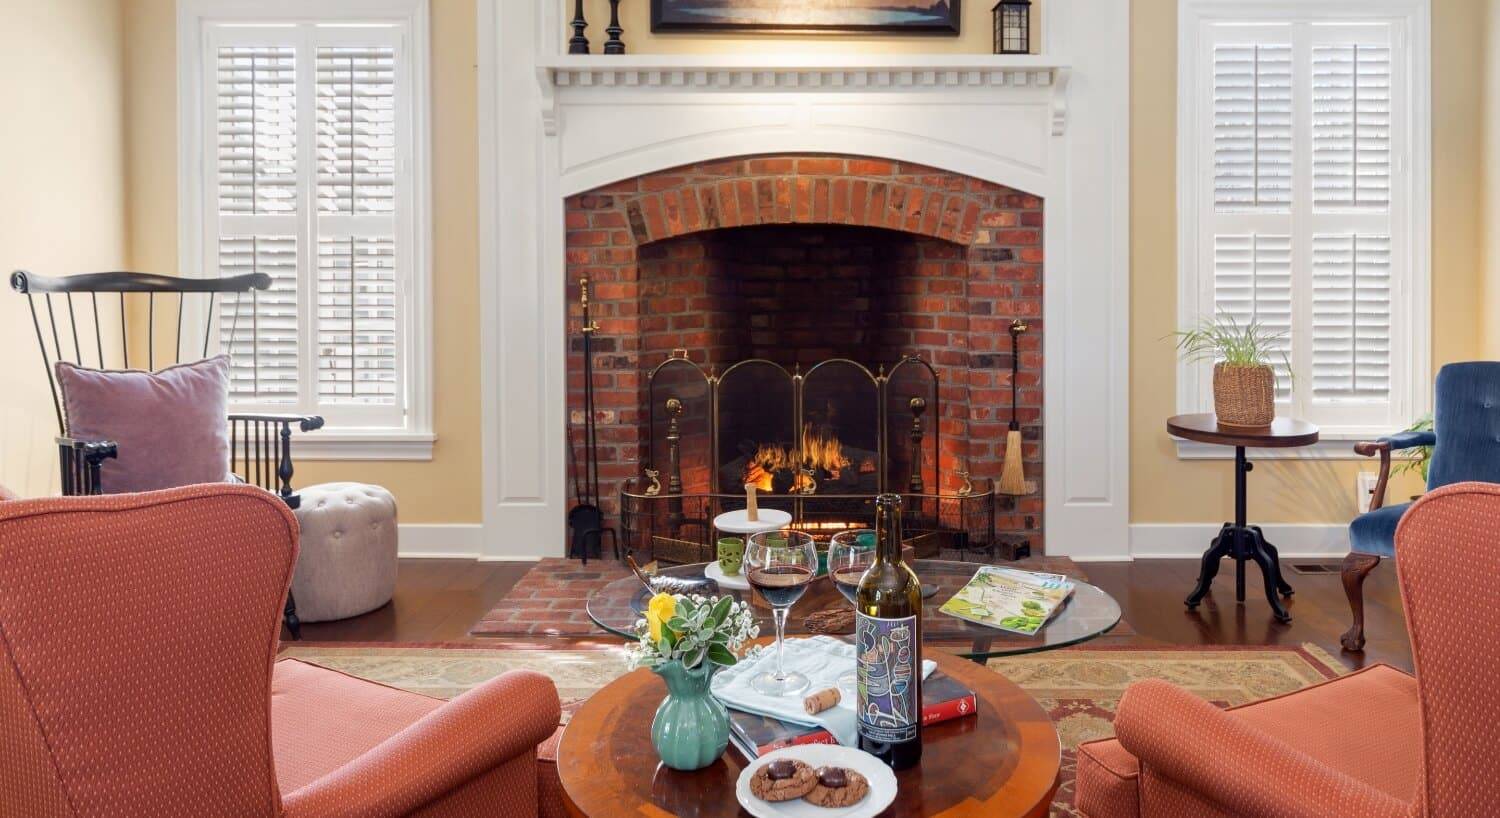 A sitting area with orange wing back chairs, a table in between then with a plate of cookies, a bottle of wine and 2 glasses of red wine, a vase of slowers, and a brick fireplace with a roaring fire along the wall.